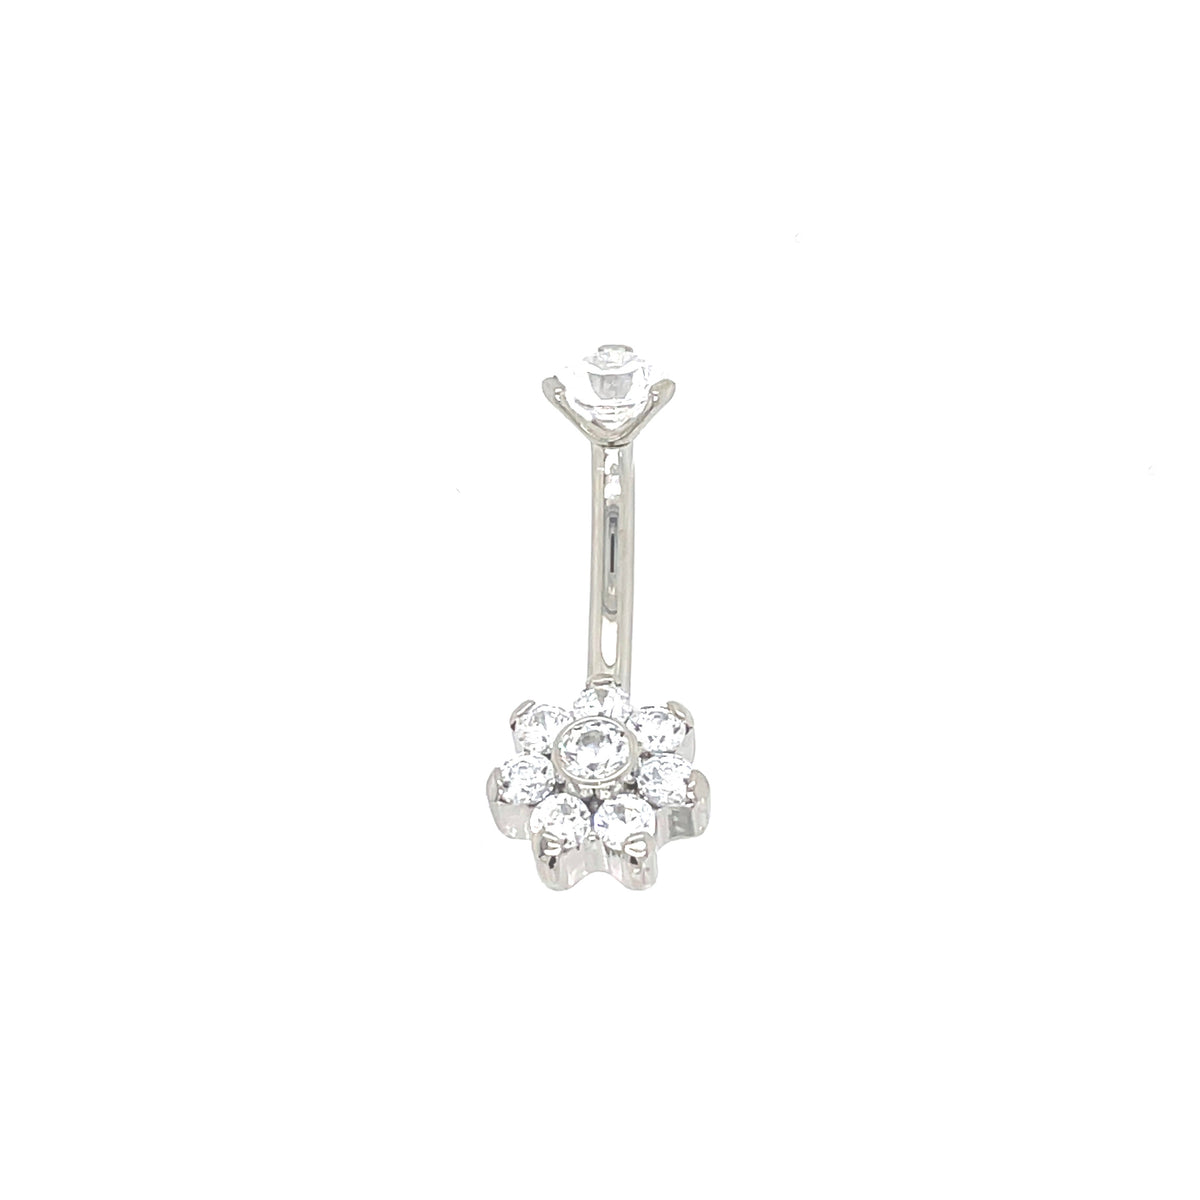 Industrial Strength Titanium White CZ Flower Curved Barbell